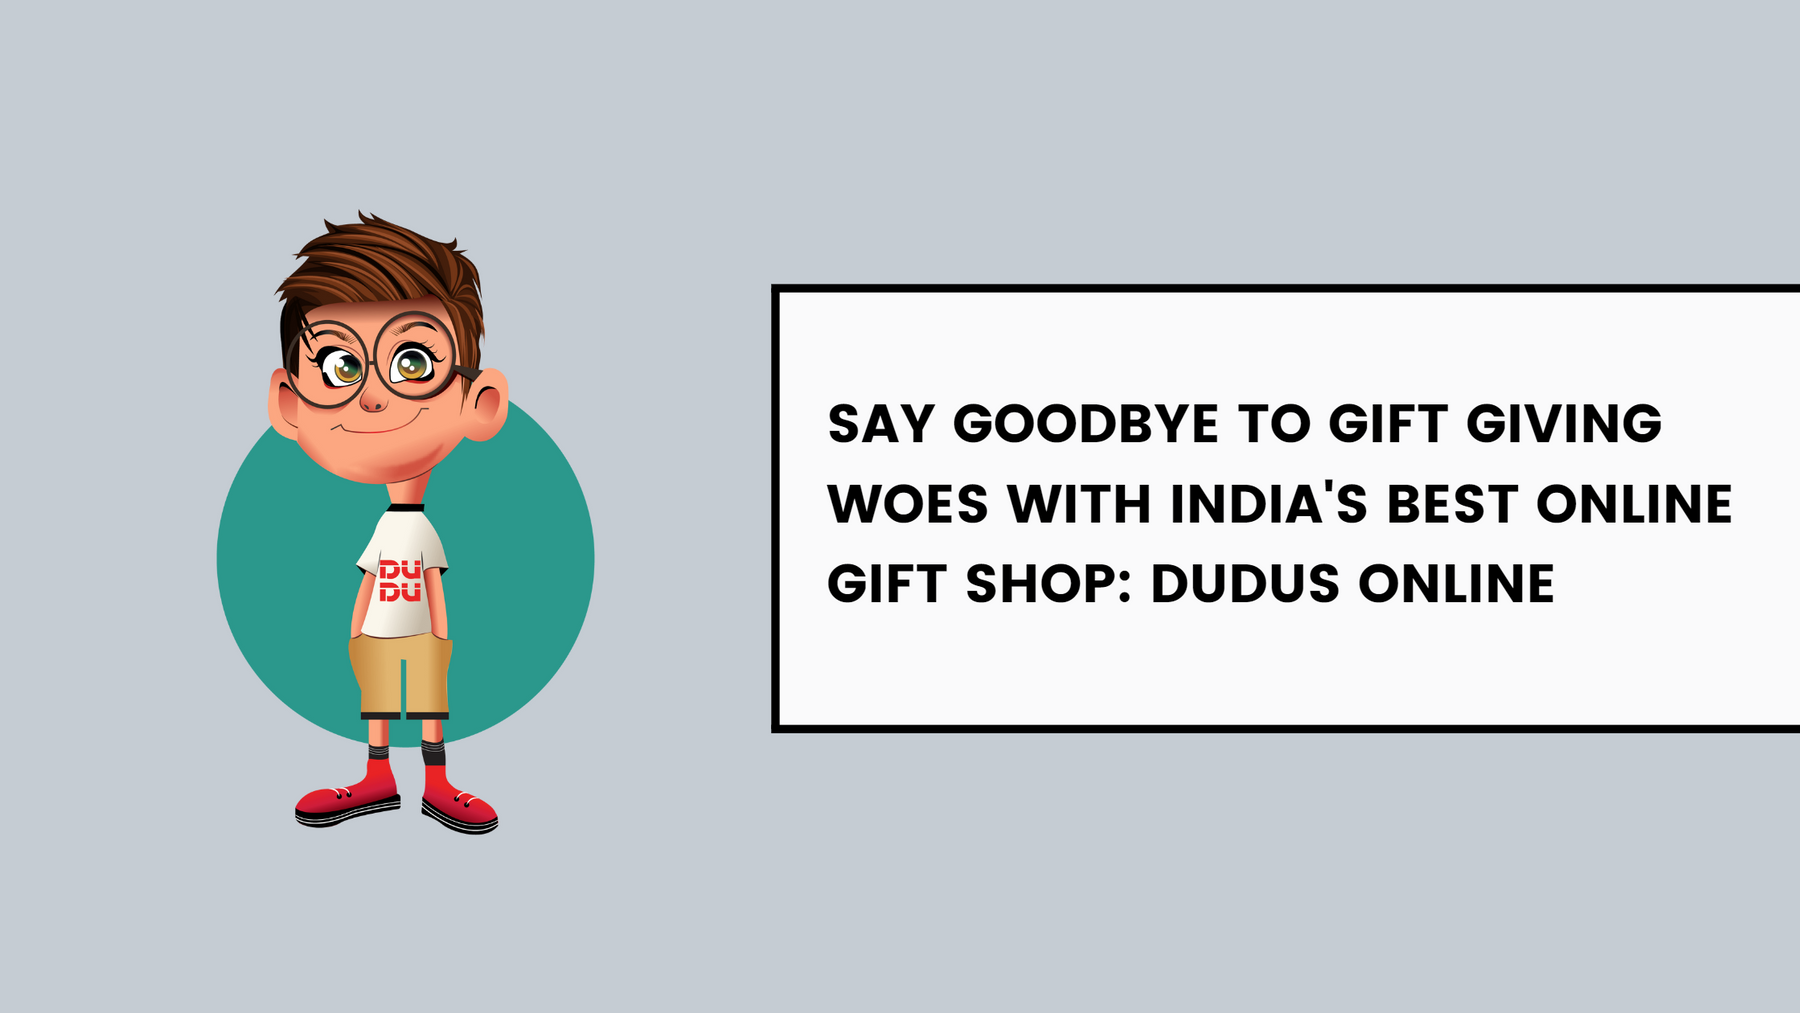 Say Goodbye To Gift Giving Woes With India's Best Online Gift Shop: Dudus Online